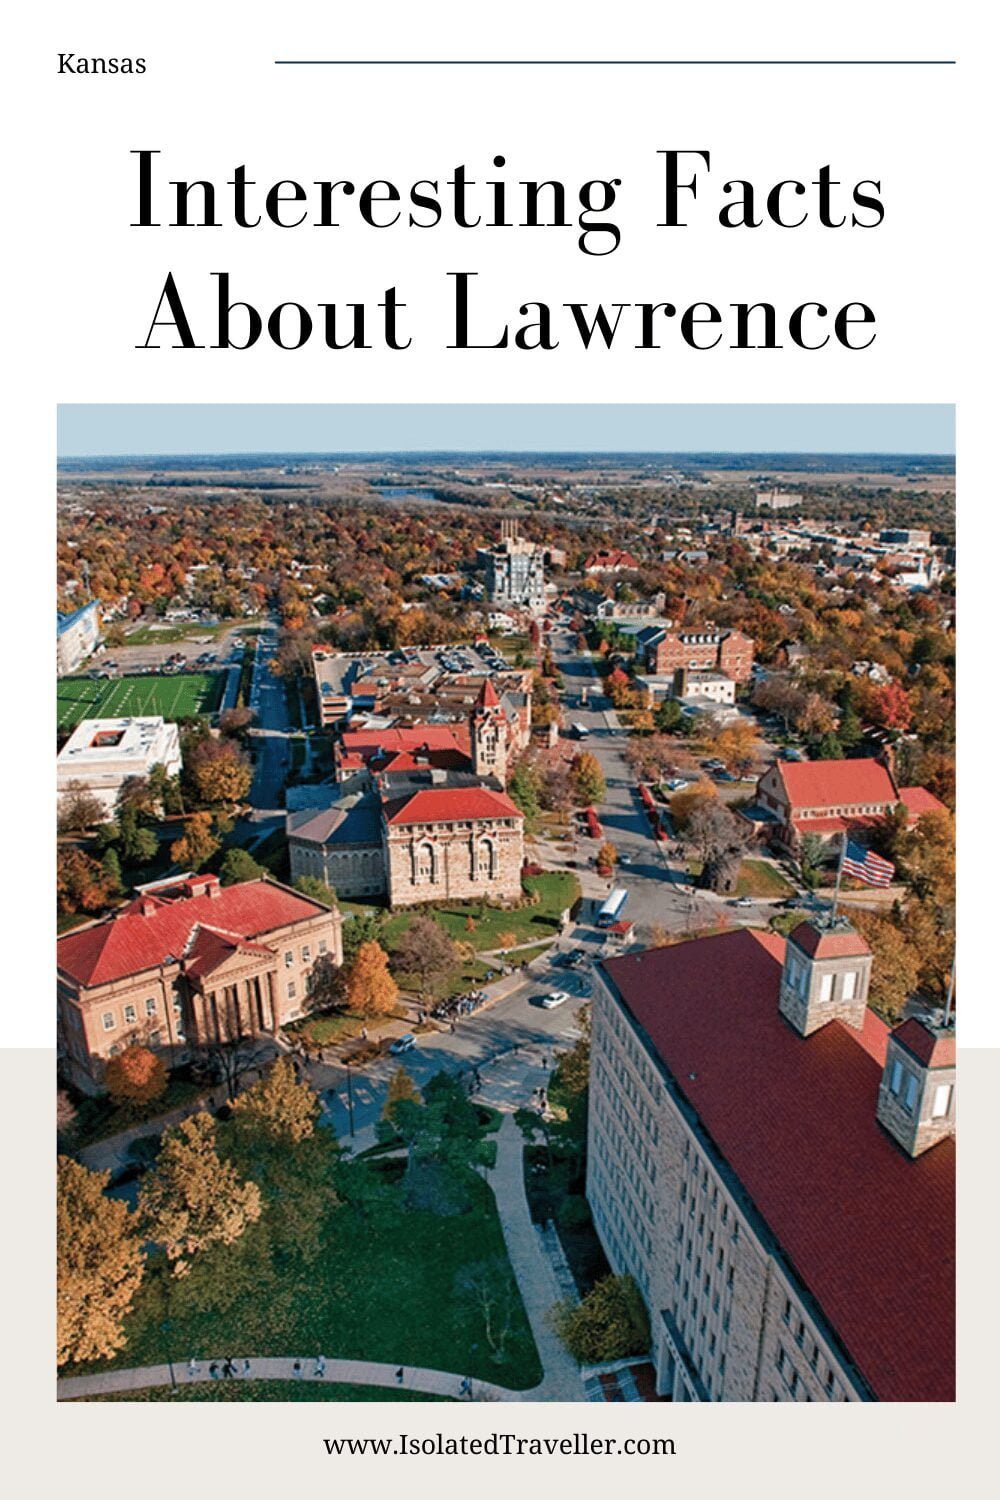 Facts About Lawrence, Kansas